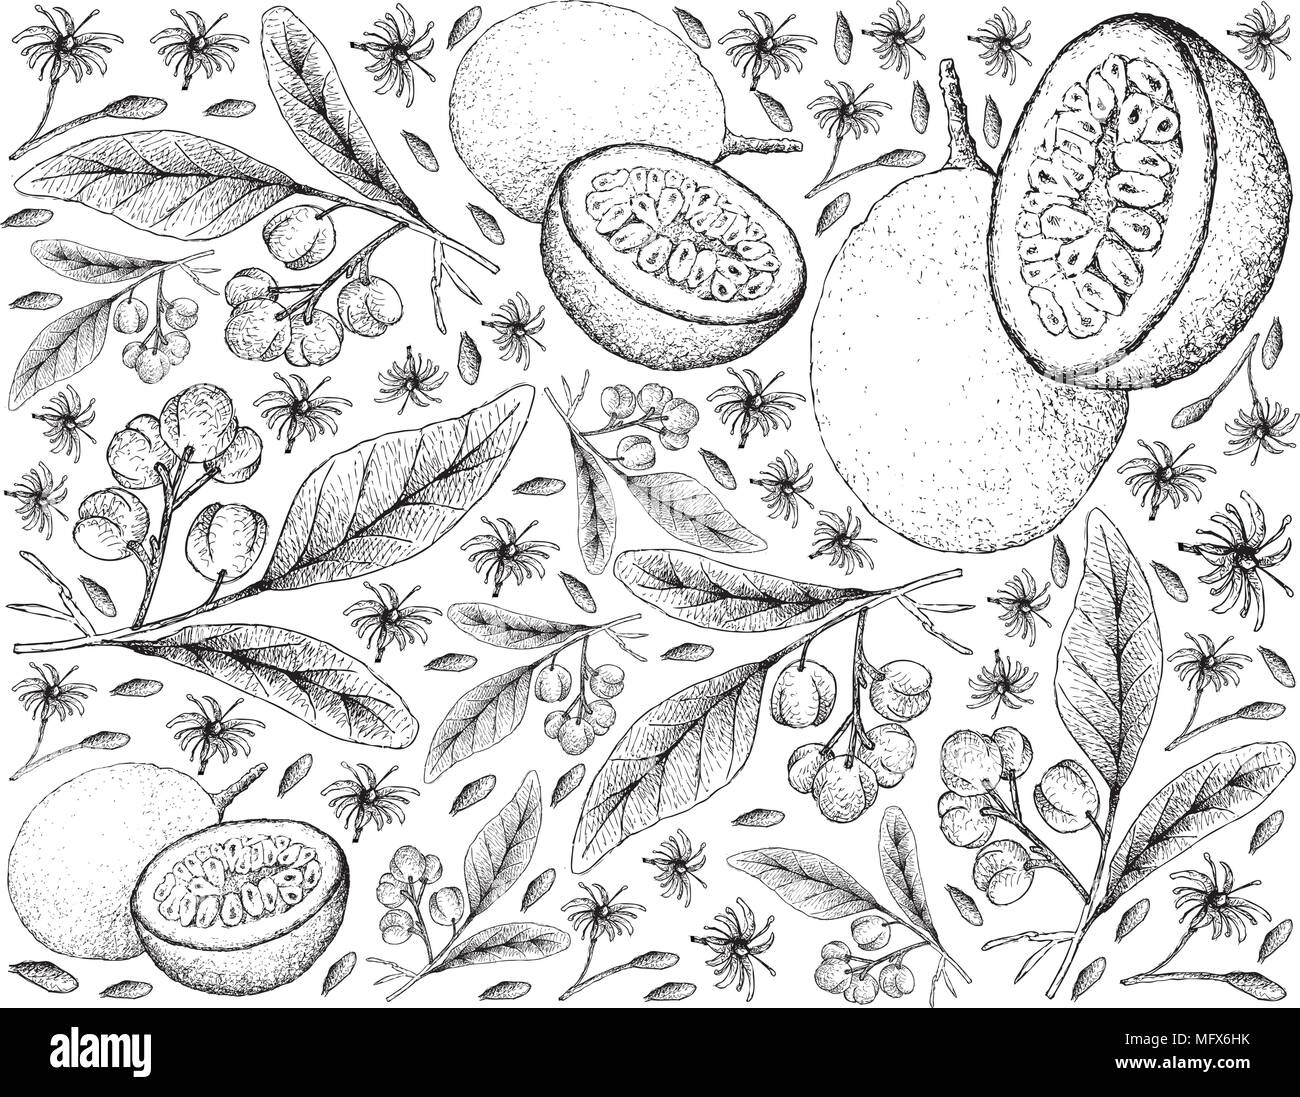 Tropical Fruits, Illustration Wallpaper Background of Hand Drawn Sketch of Acronychia Pedunculata and Passion Fruit or Passiflora Edulis. Stock Vector